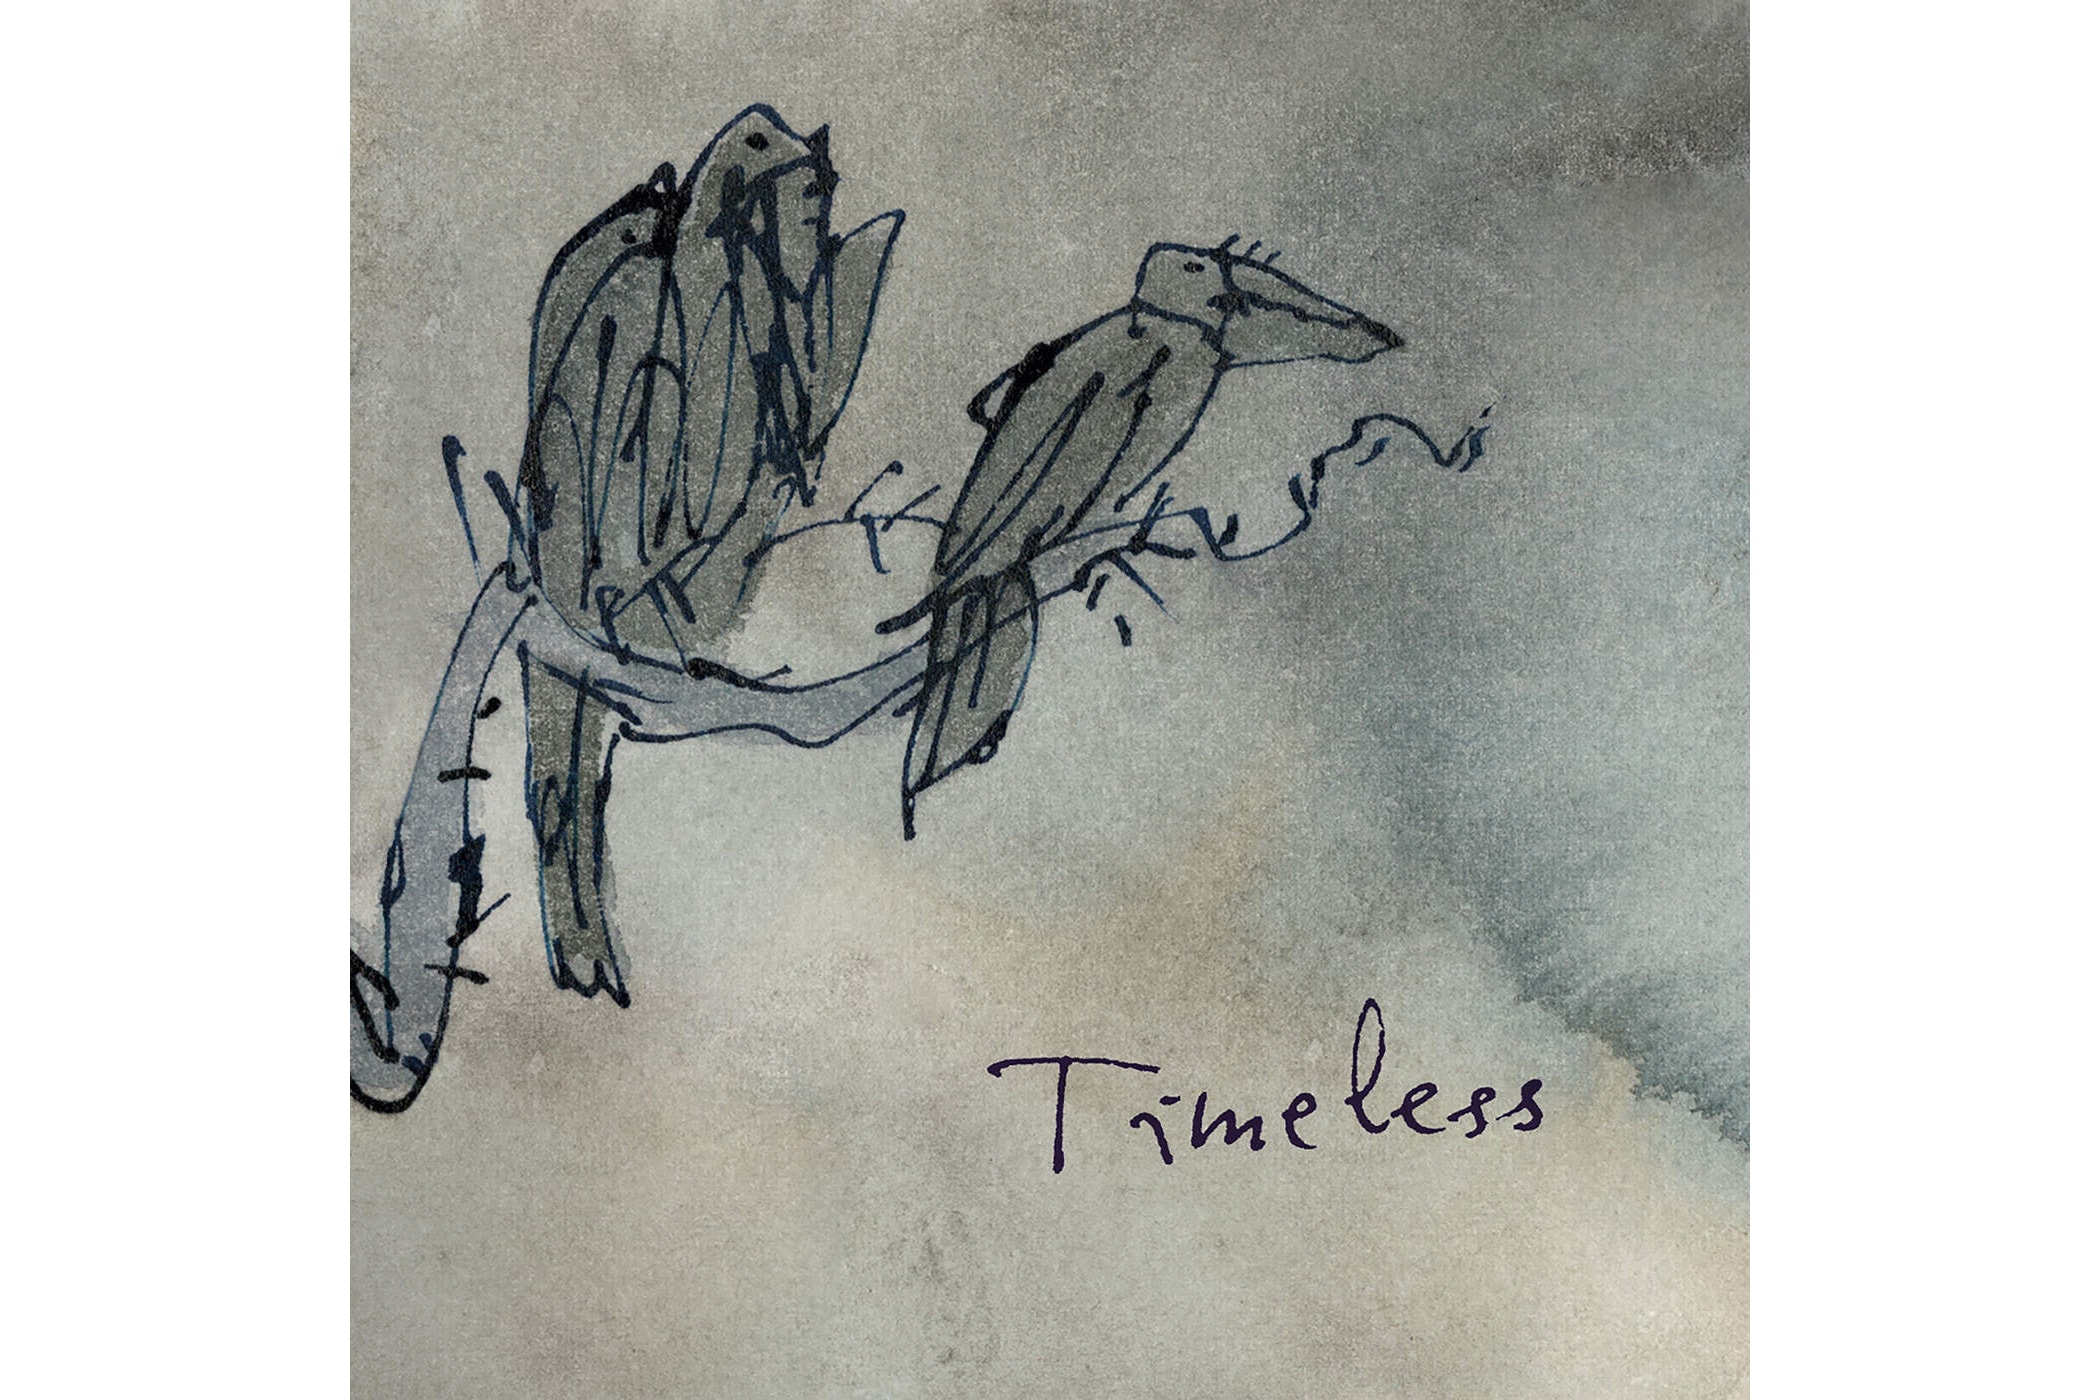 James Blake and Vince Staples "Timeless (Remix)", music, track, collaboration, the colour in anything